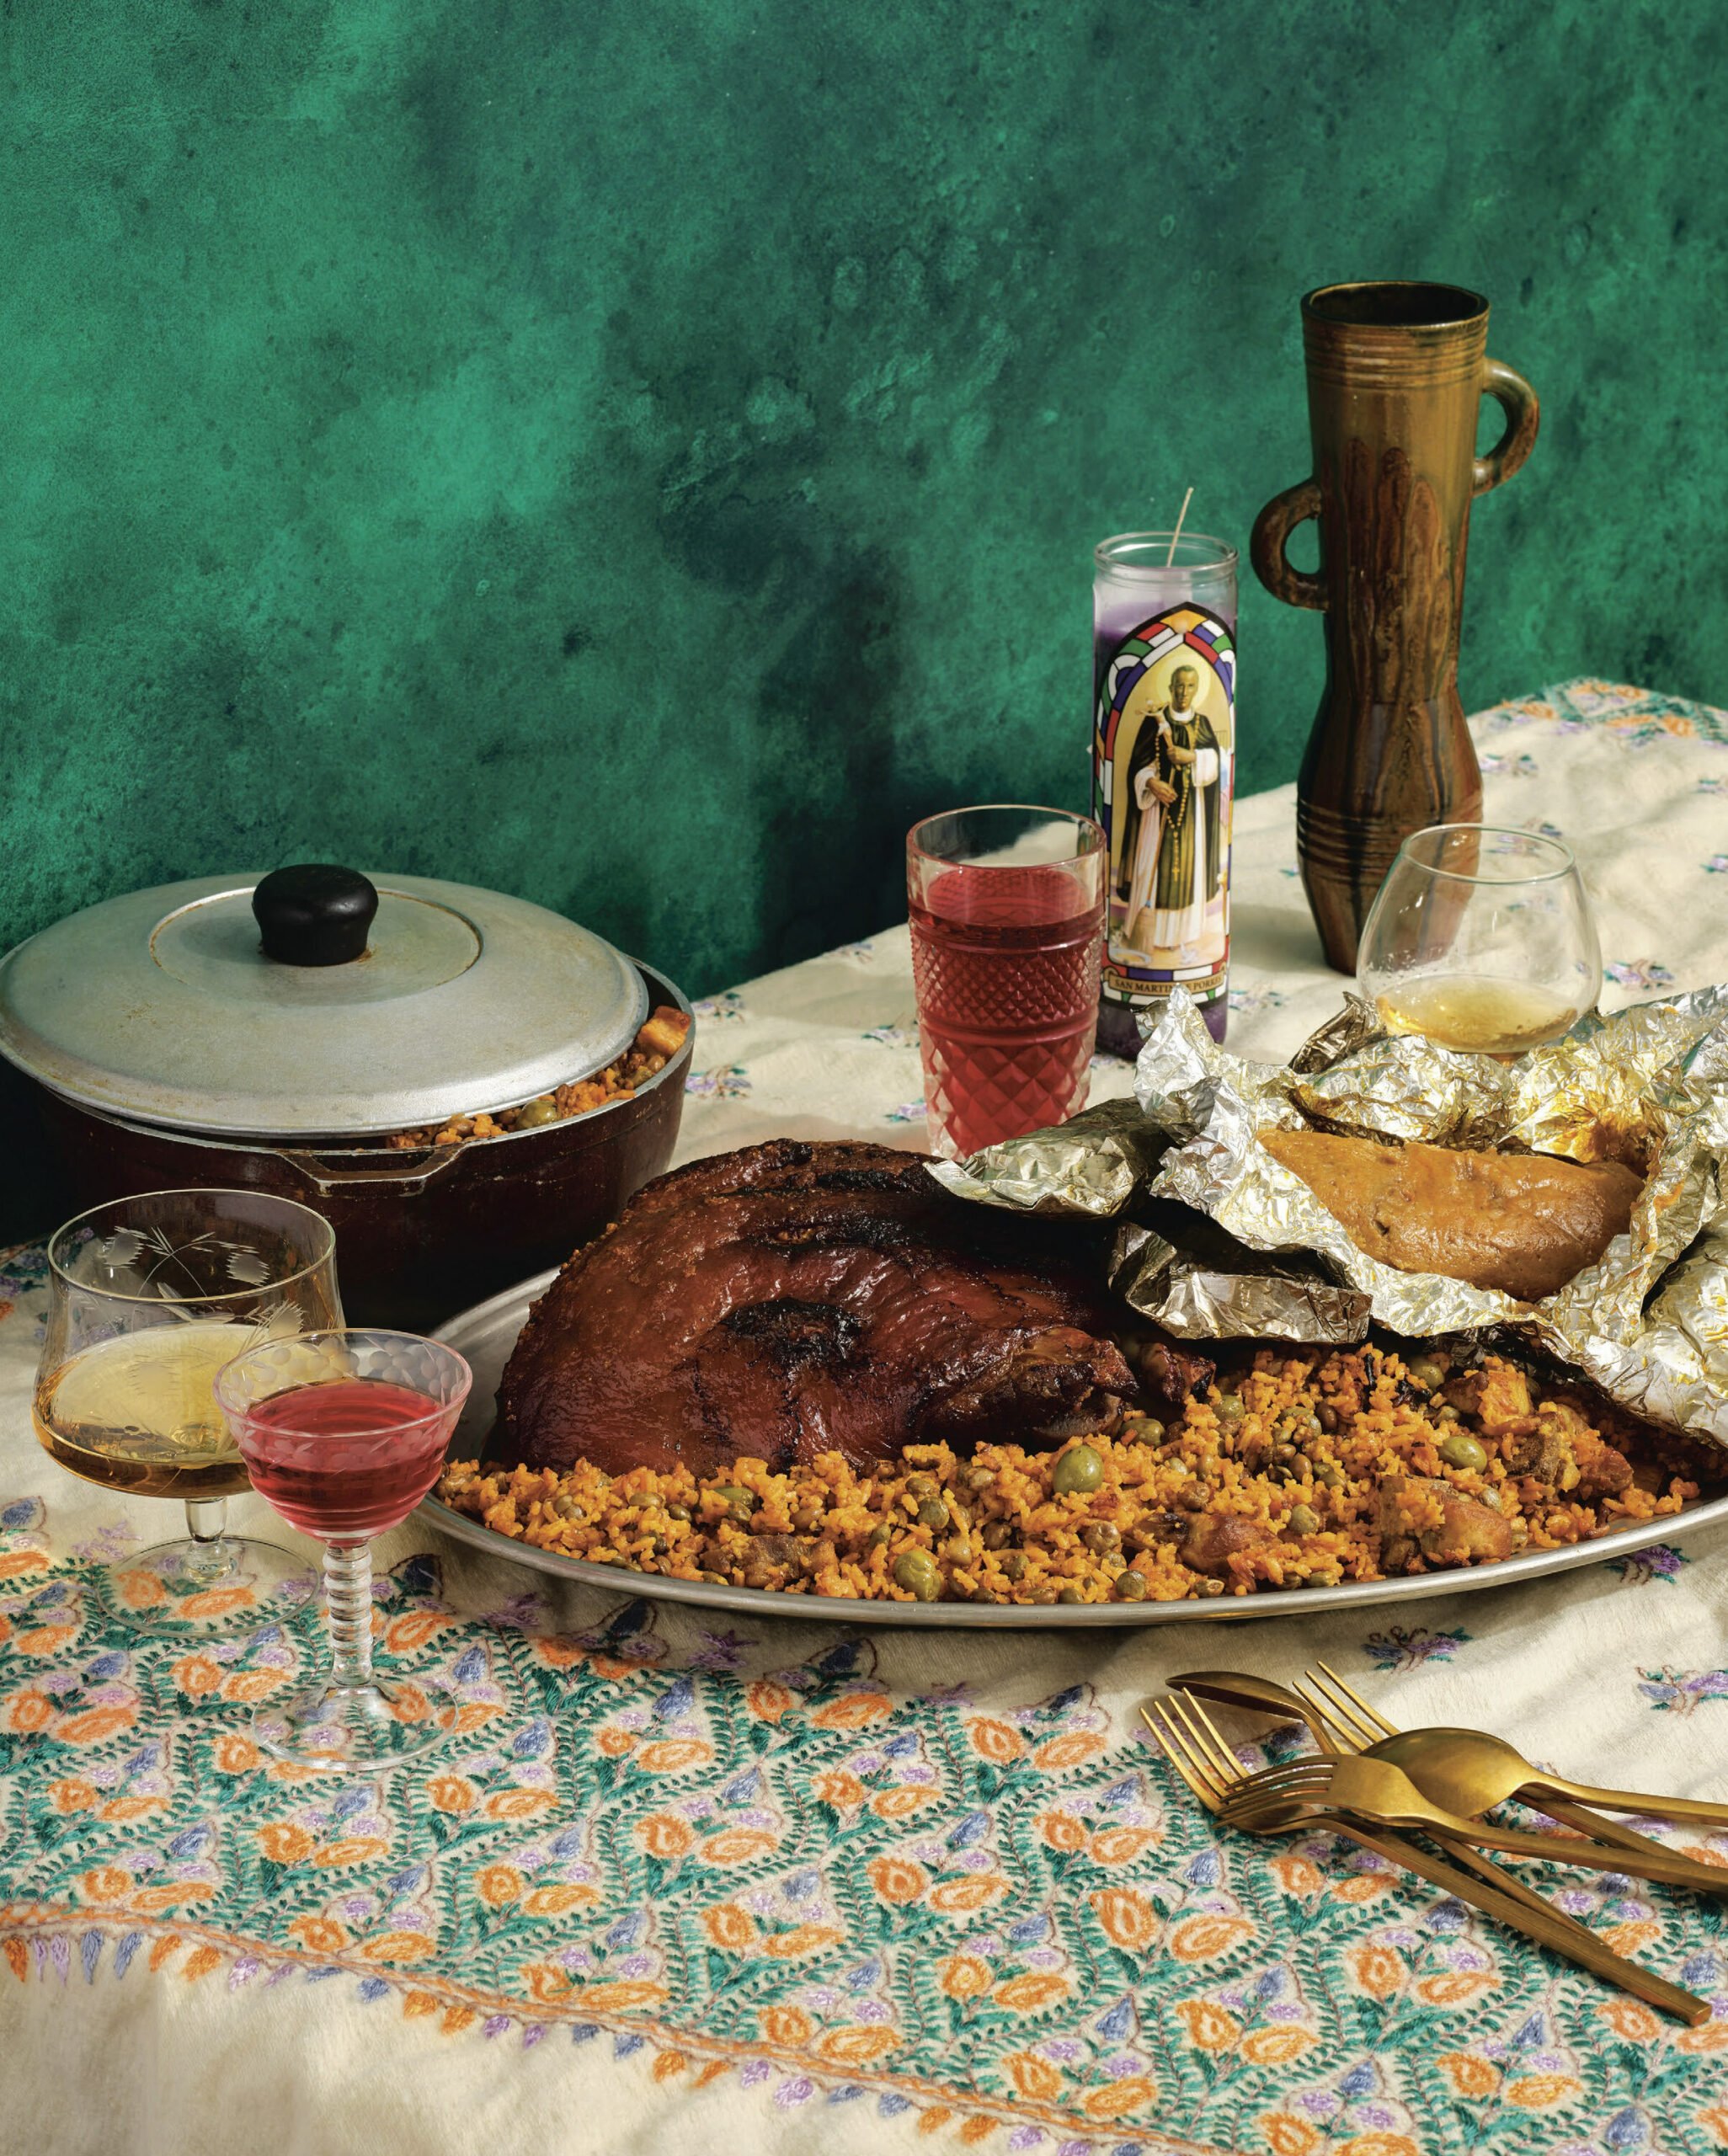 Pernil excerpted from Diasporican: A Puerto Rican Cookbook by Illyanna Maisonet.